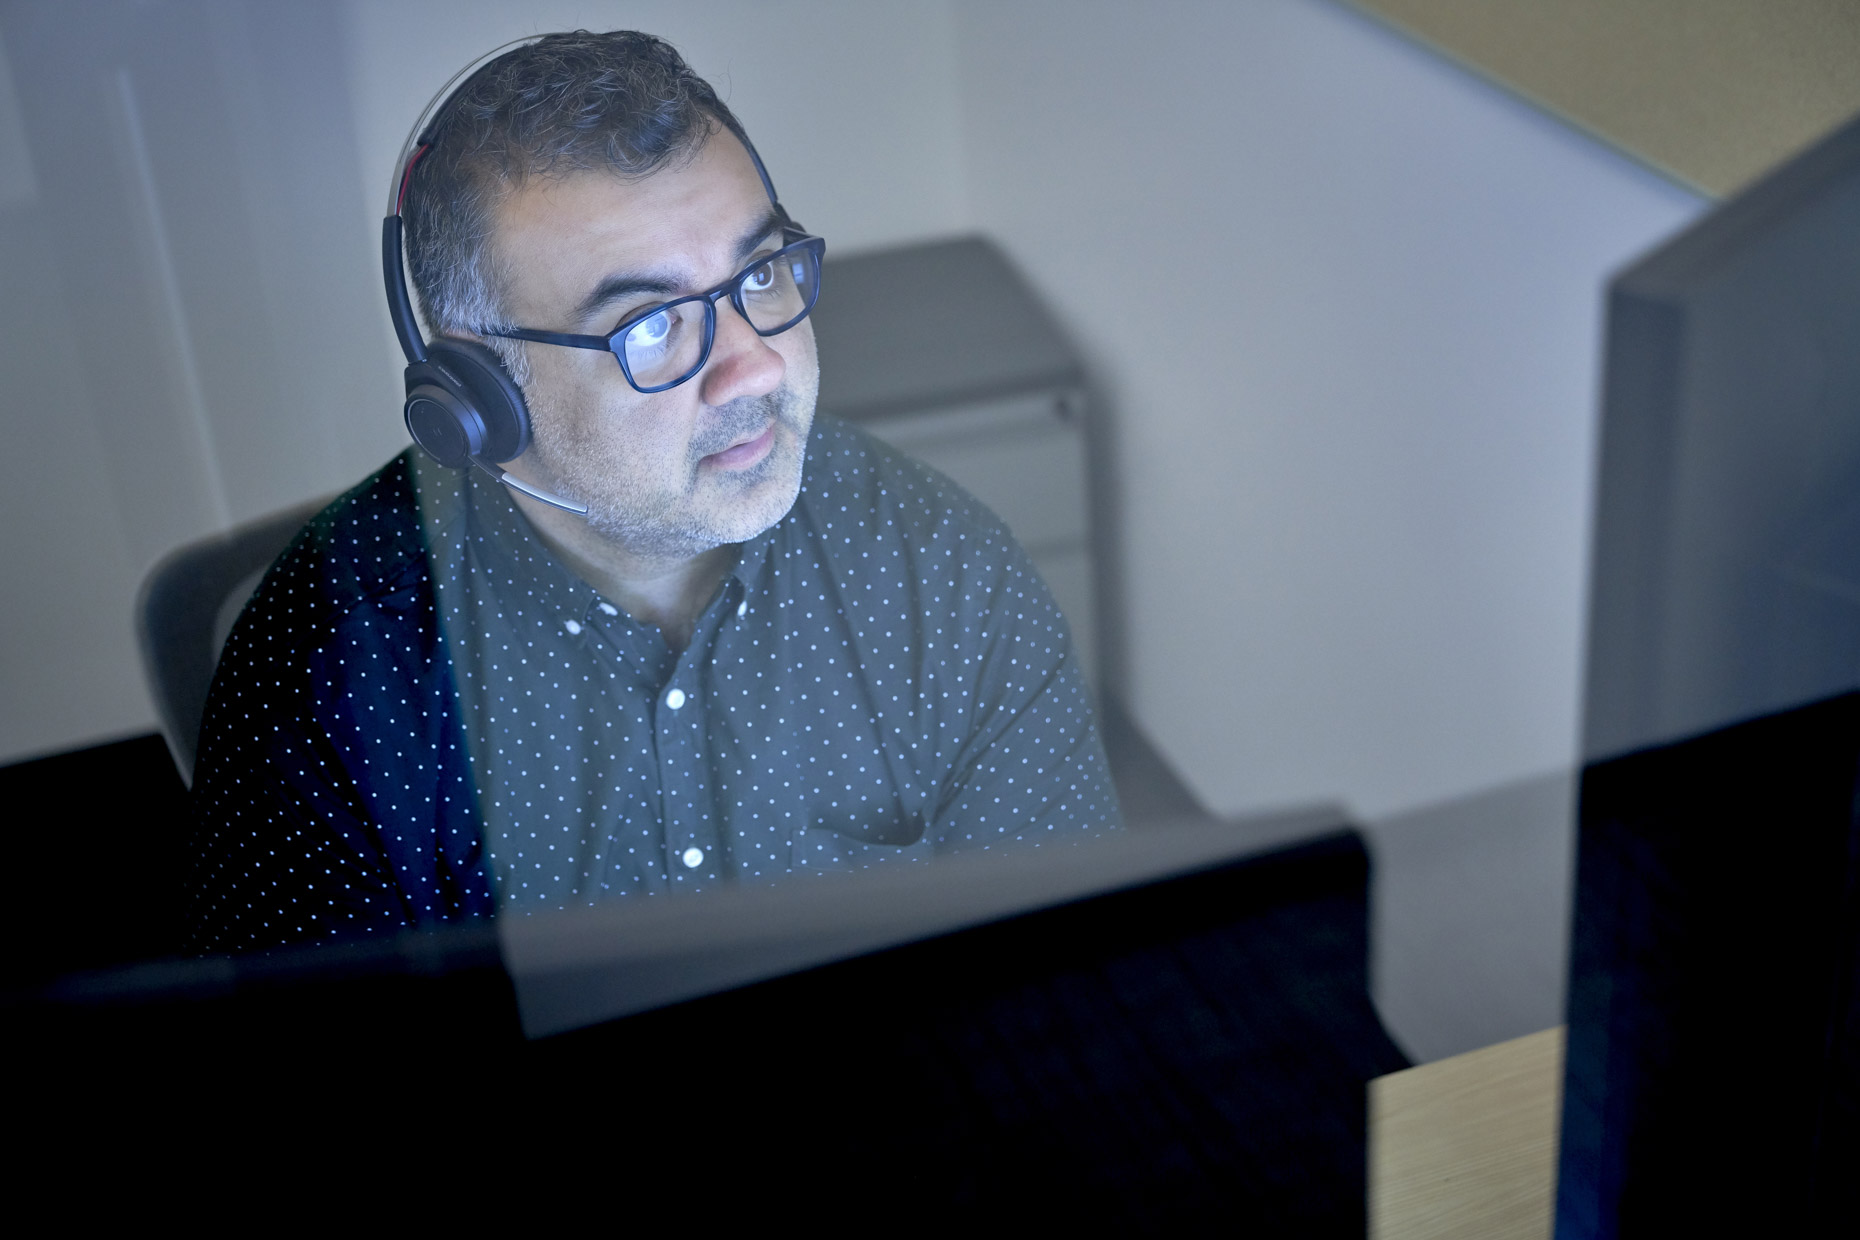 Man with headset working in office on computer